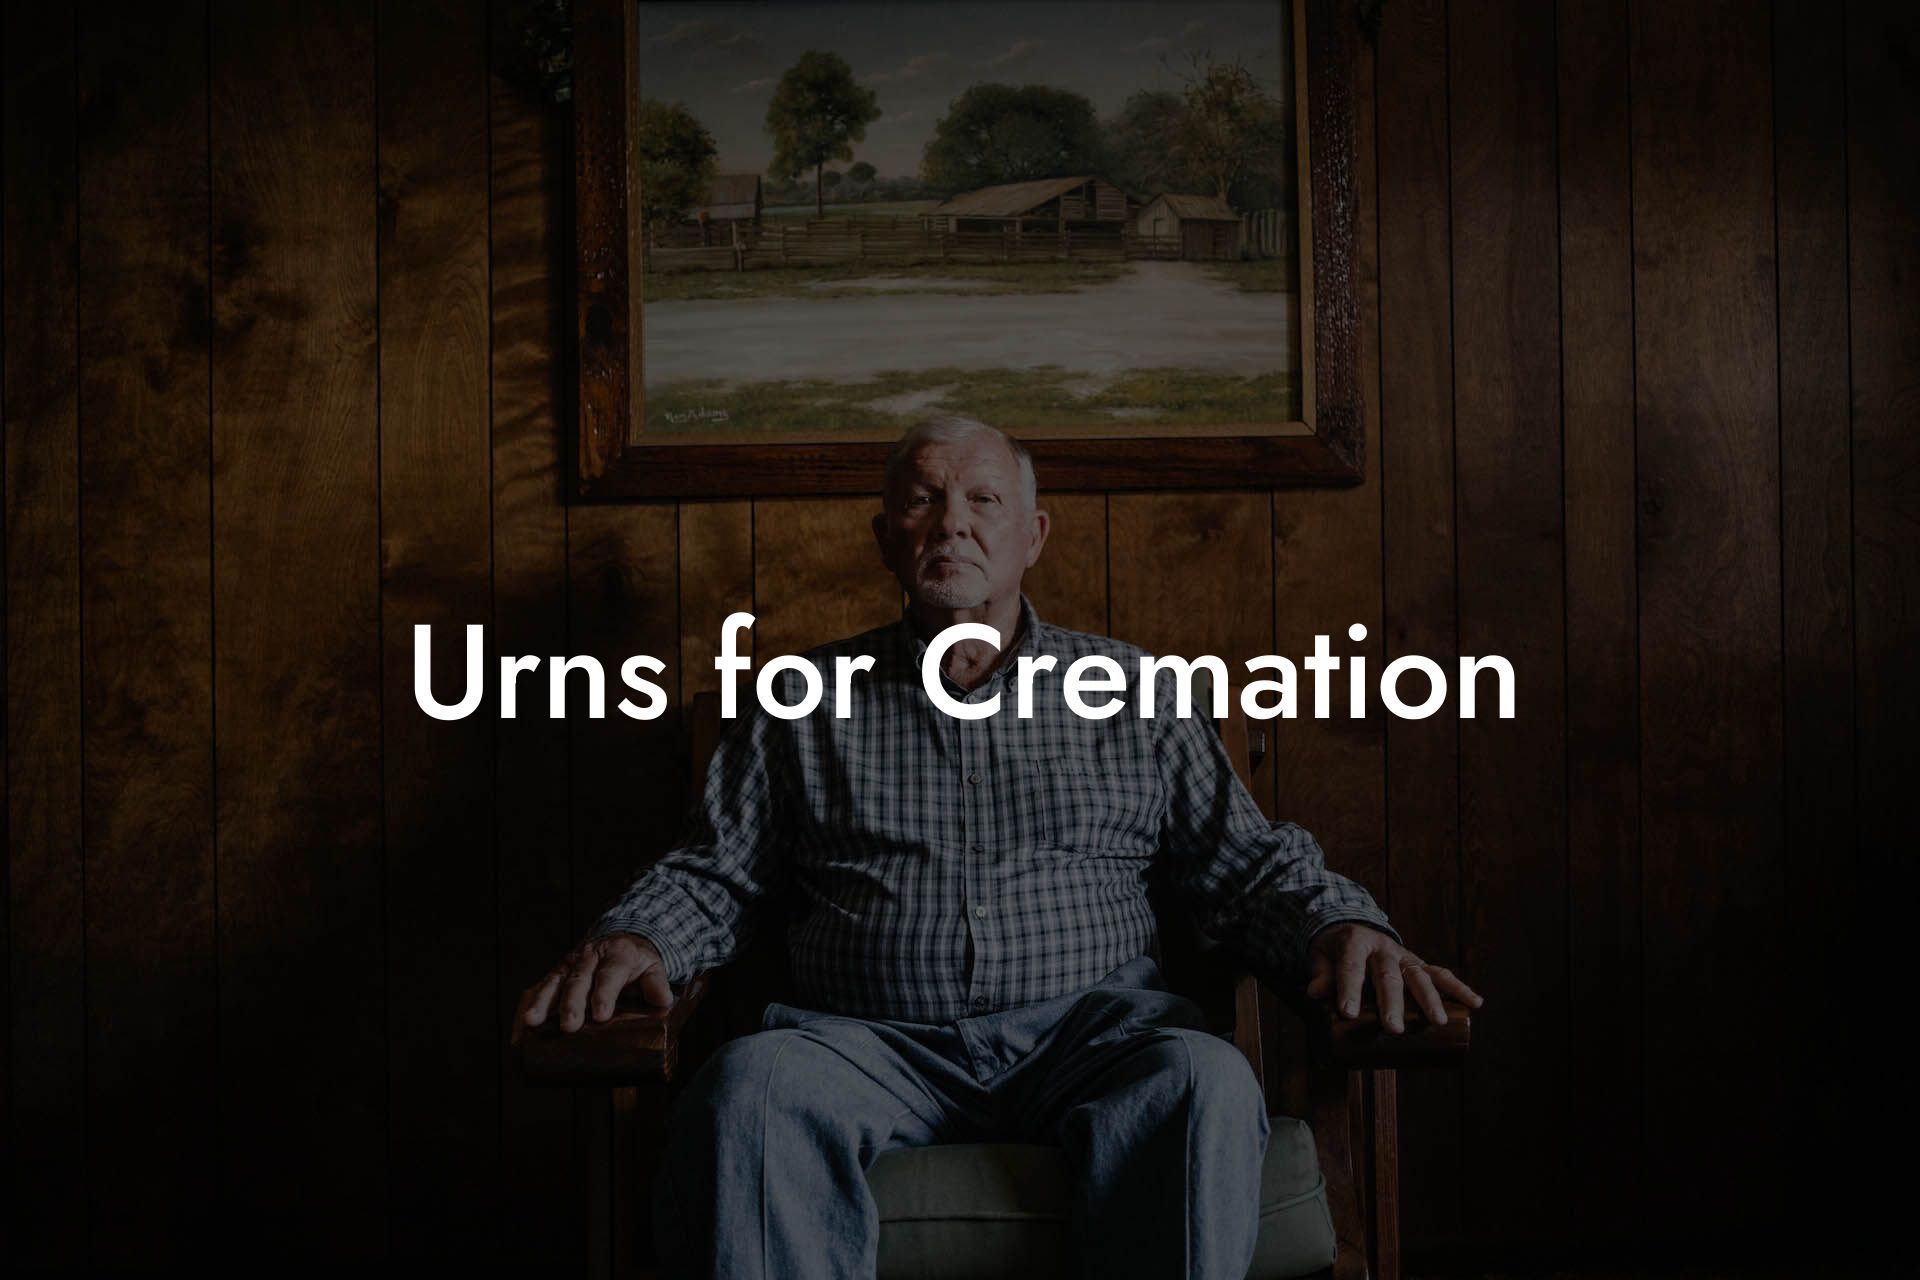 Urns for Cremation